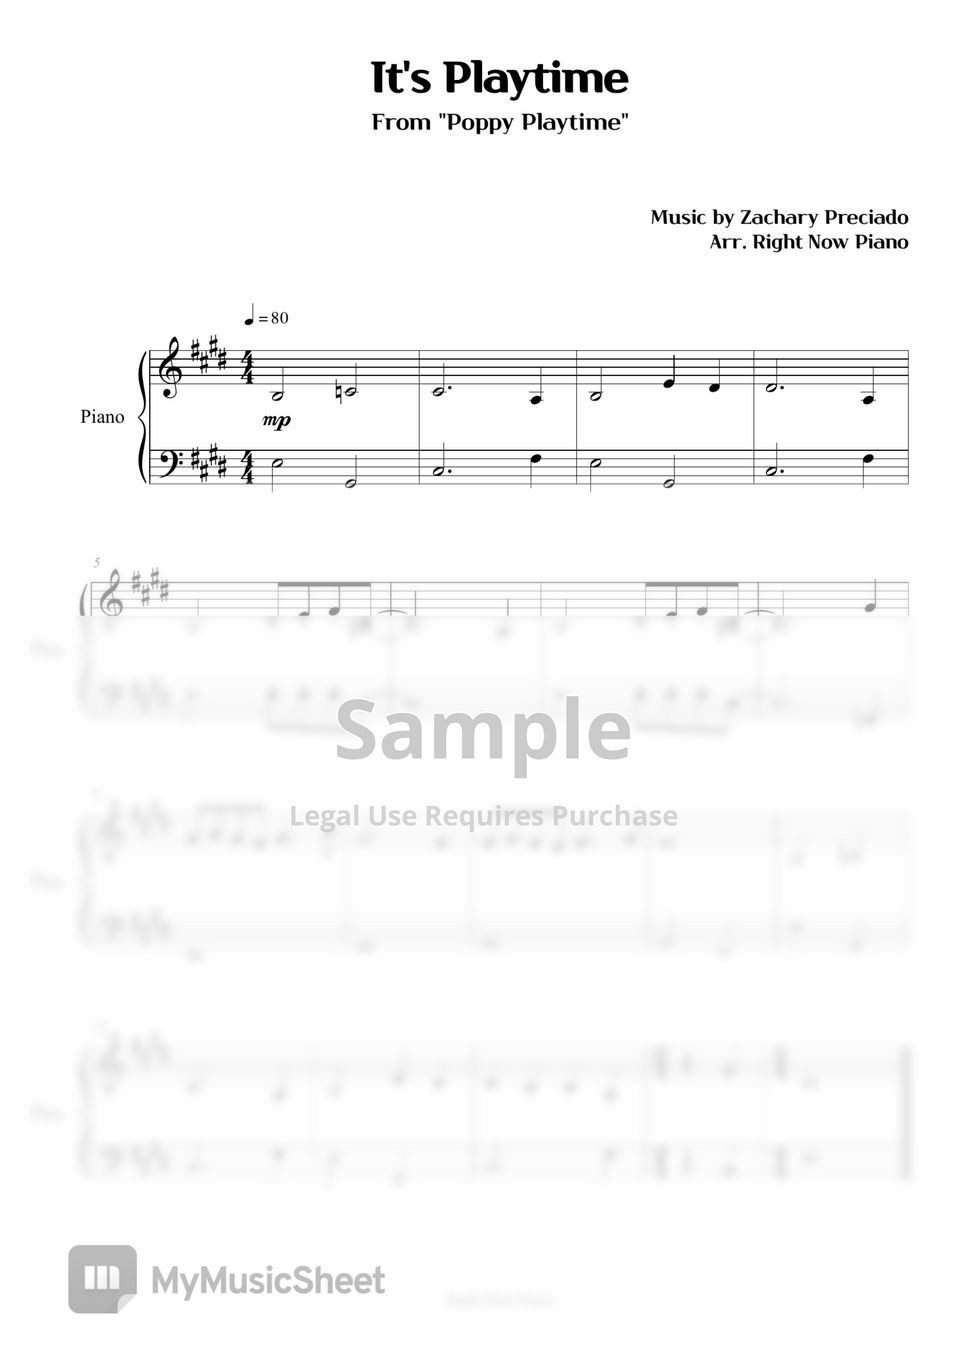 Poppy Playtime - It's Playtime Sheets by Right Now Piano